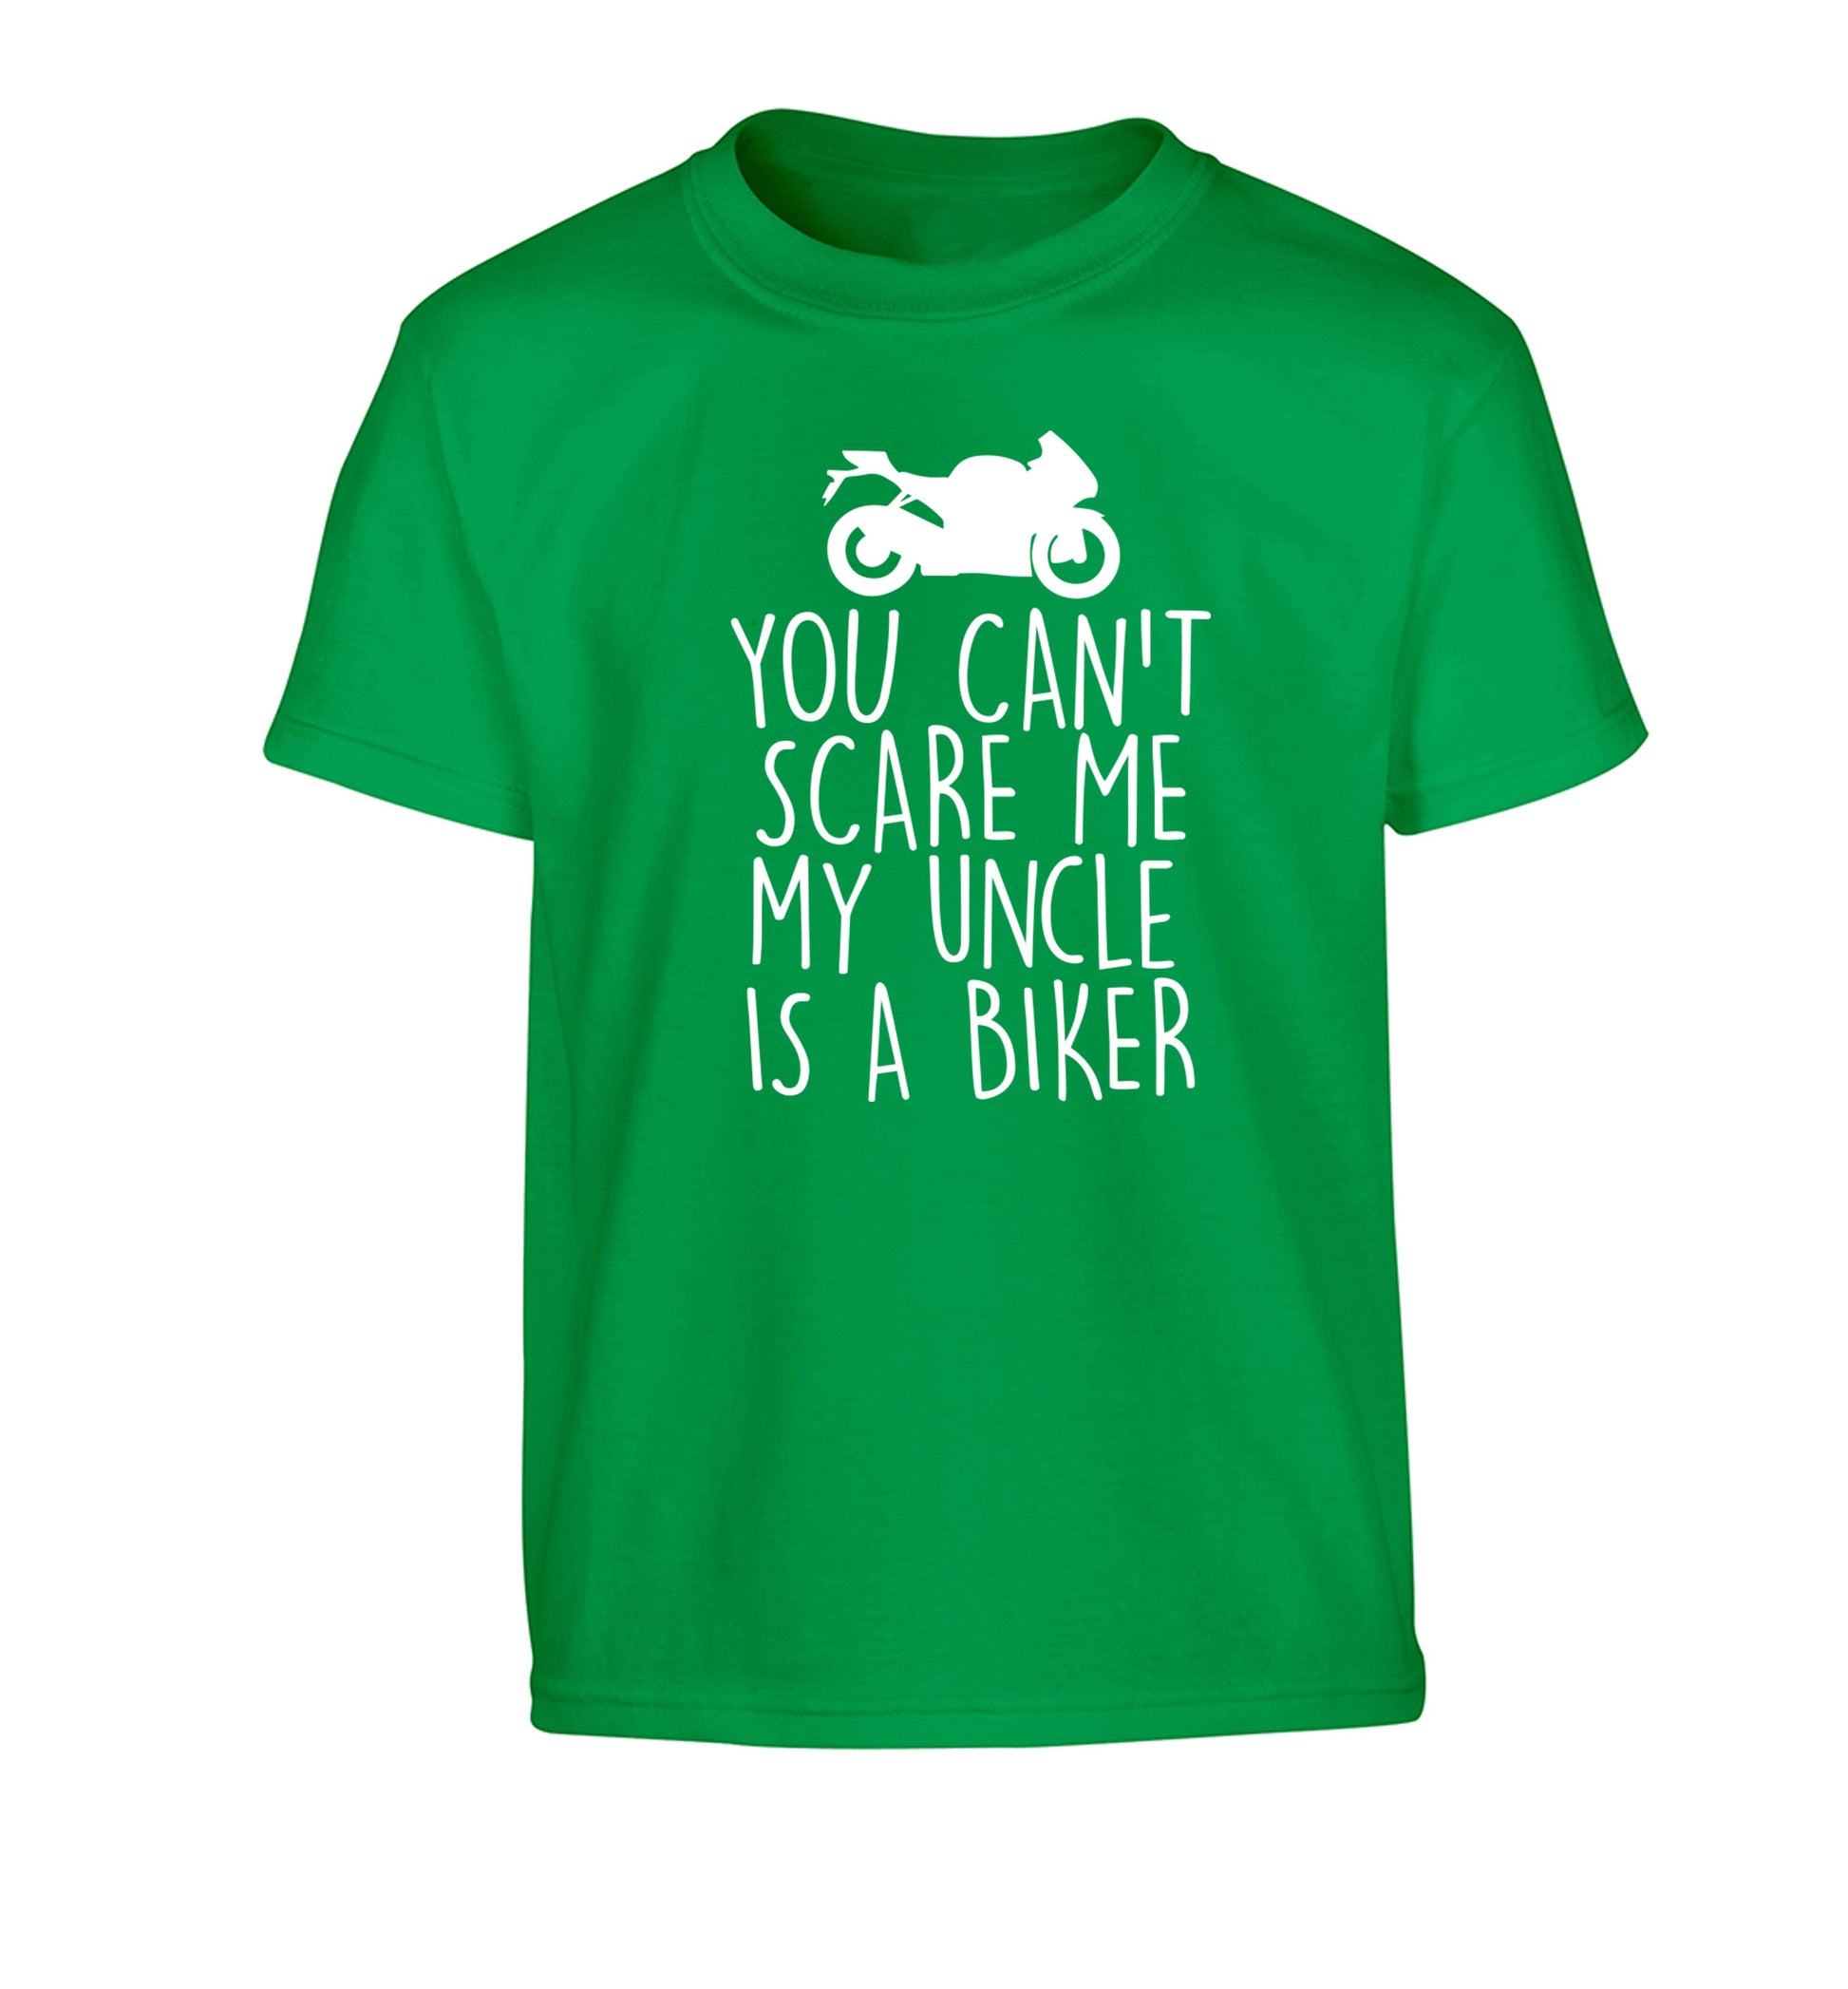 You can't scare me my uncle is a biker Children's green Tshirt 12-13 Years